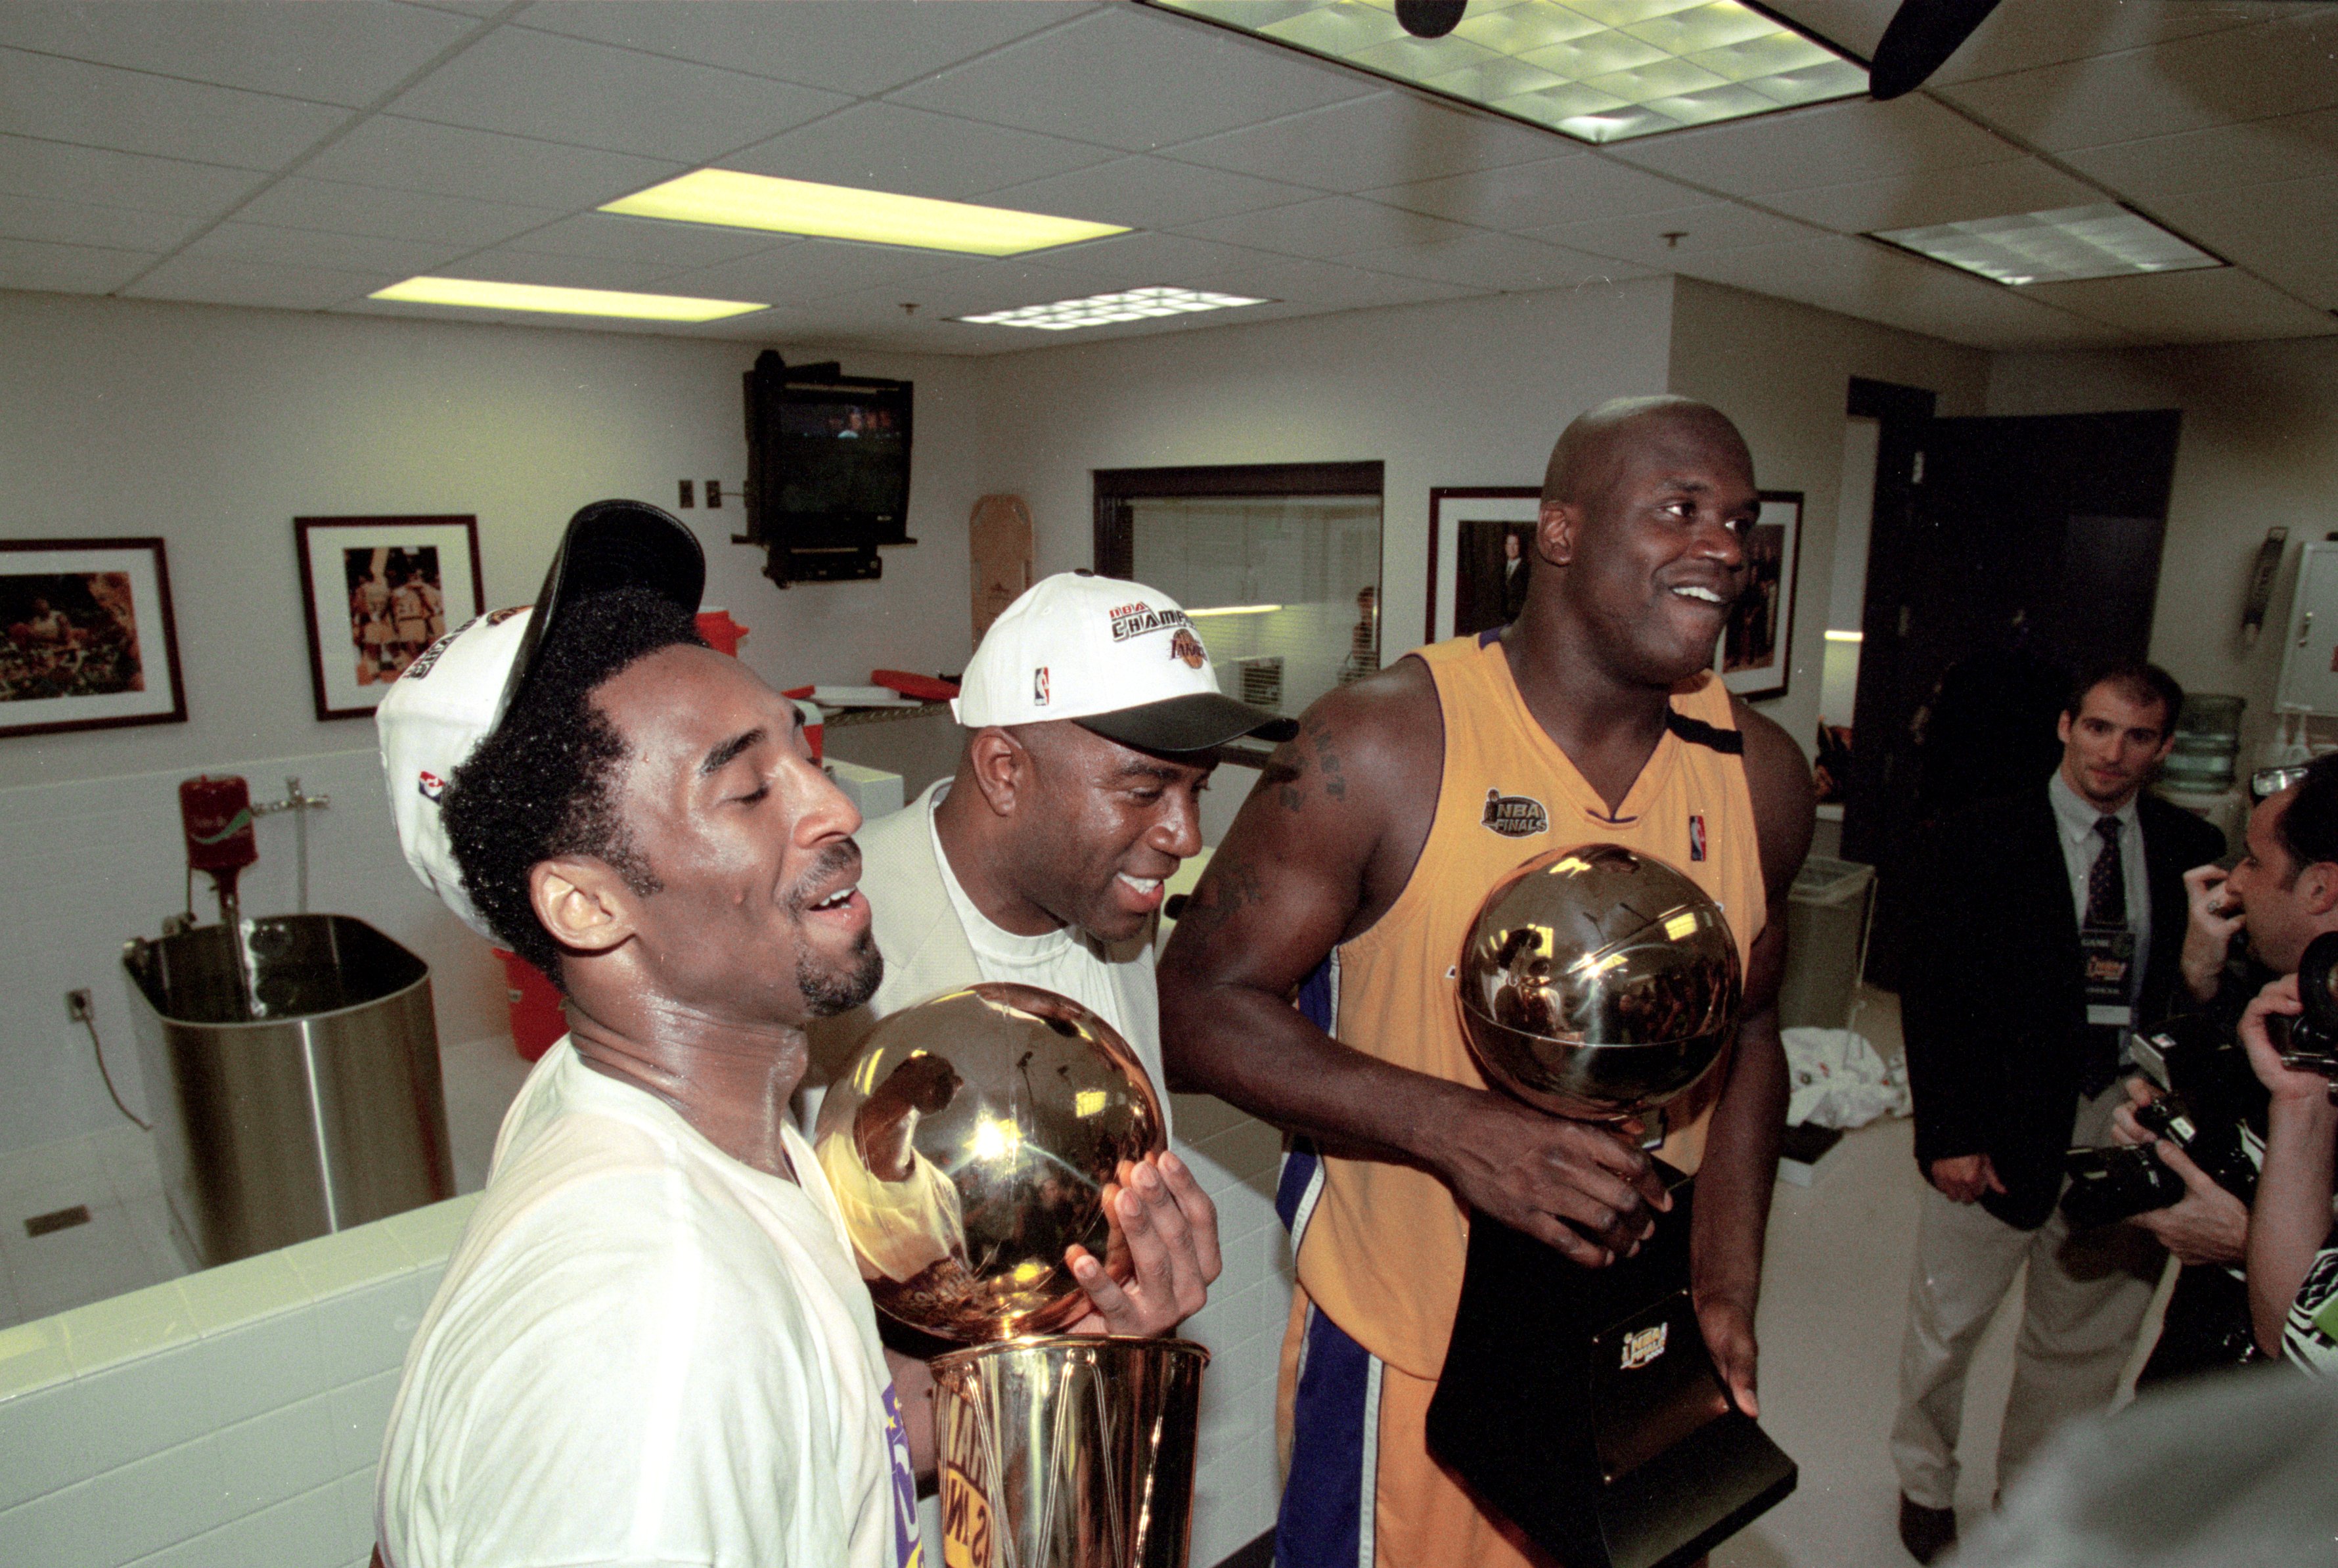 Los Angeles Lakers: Power Ranking Each of Their NBA Championship Teams